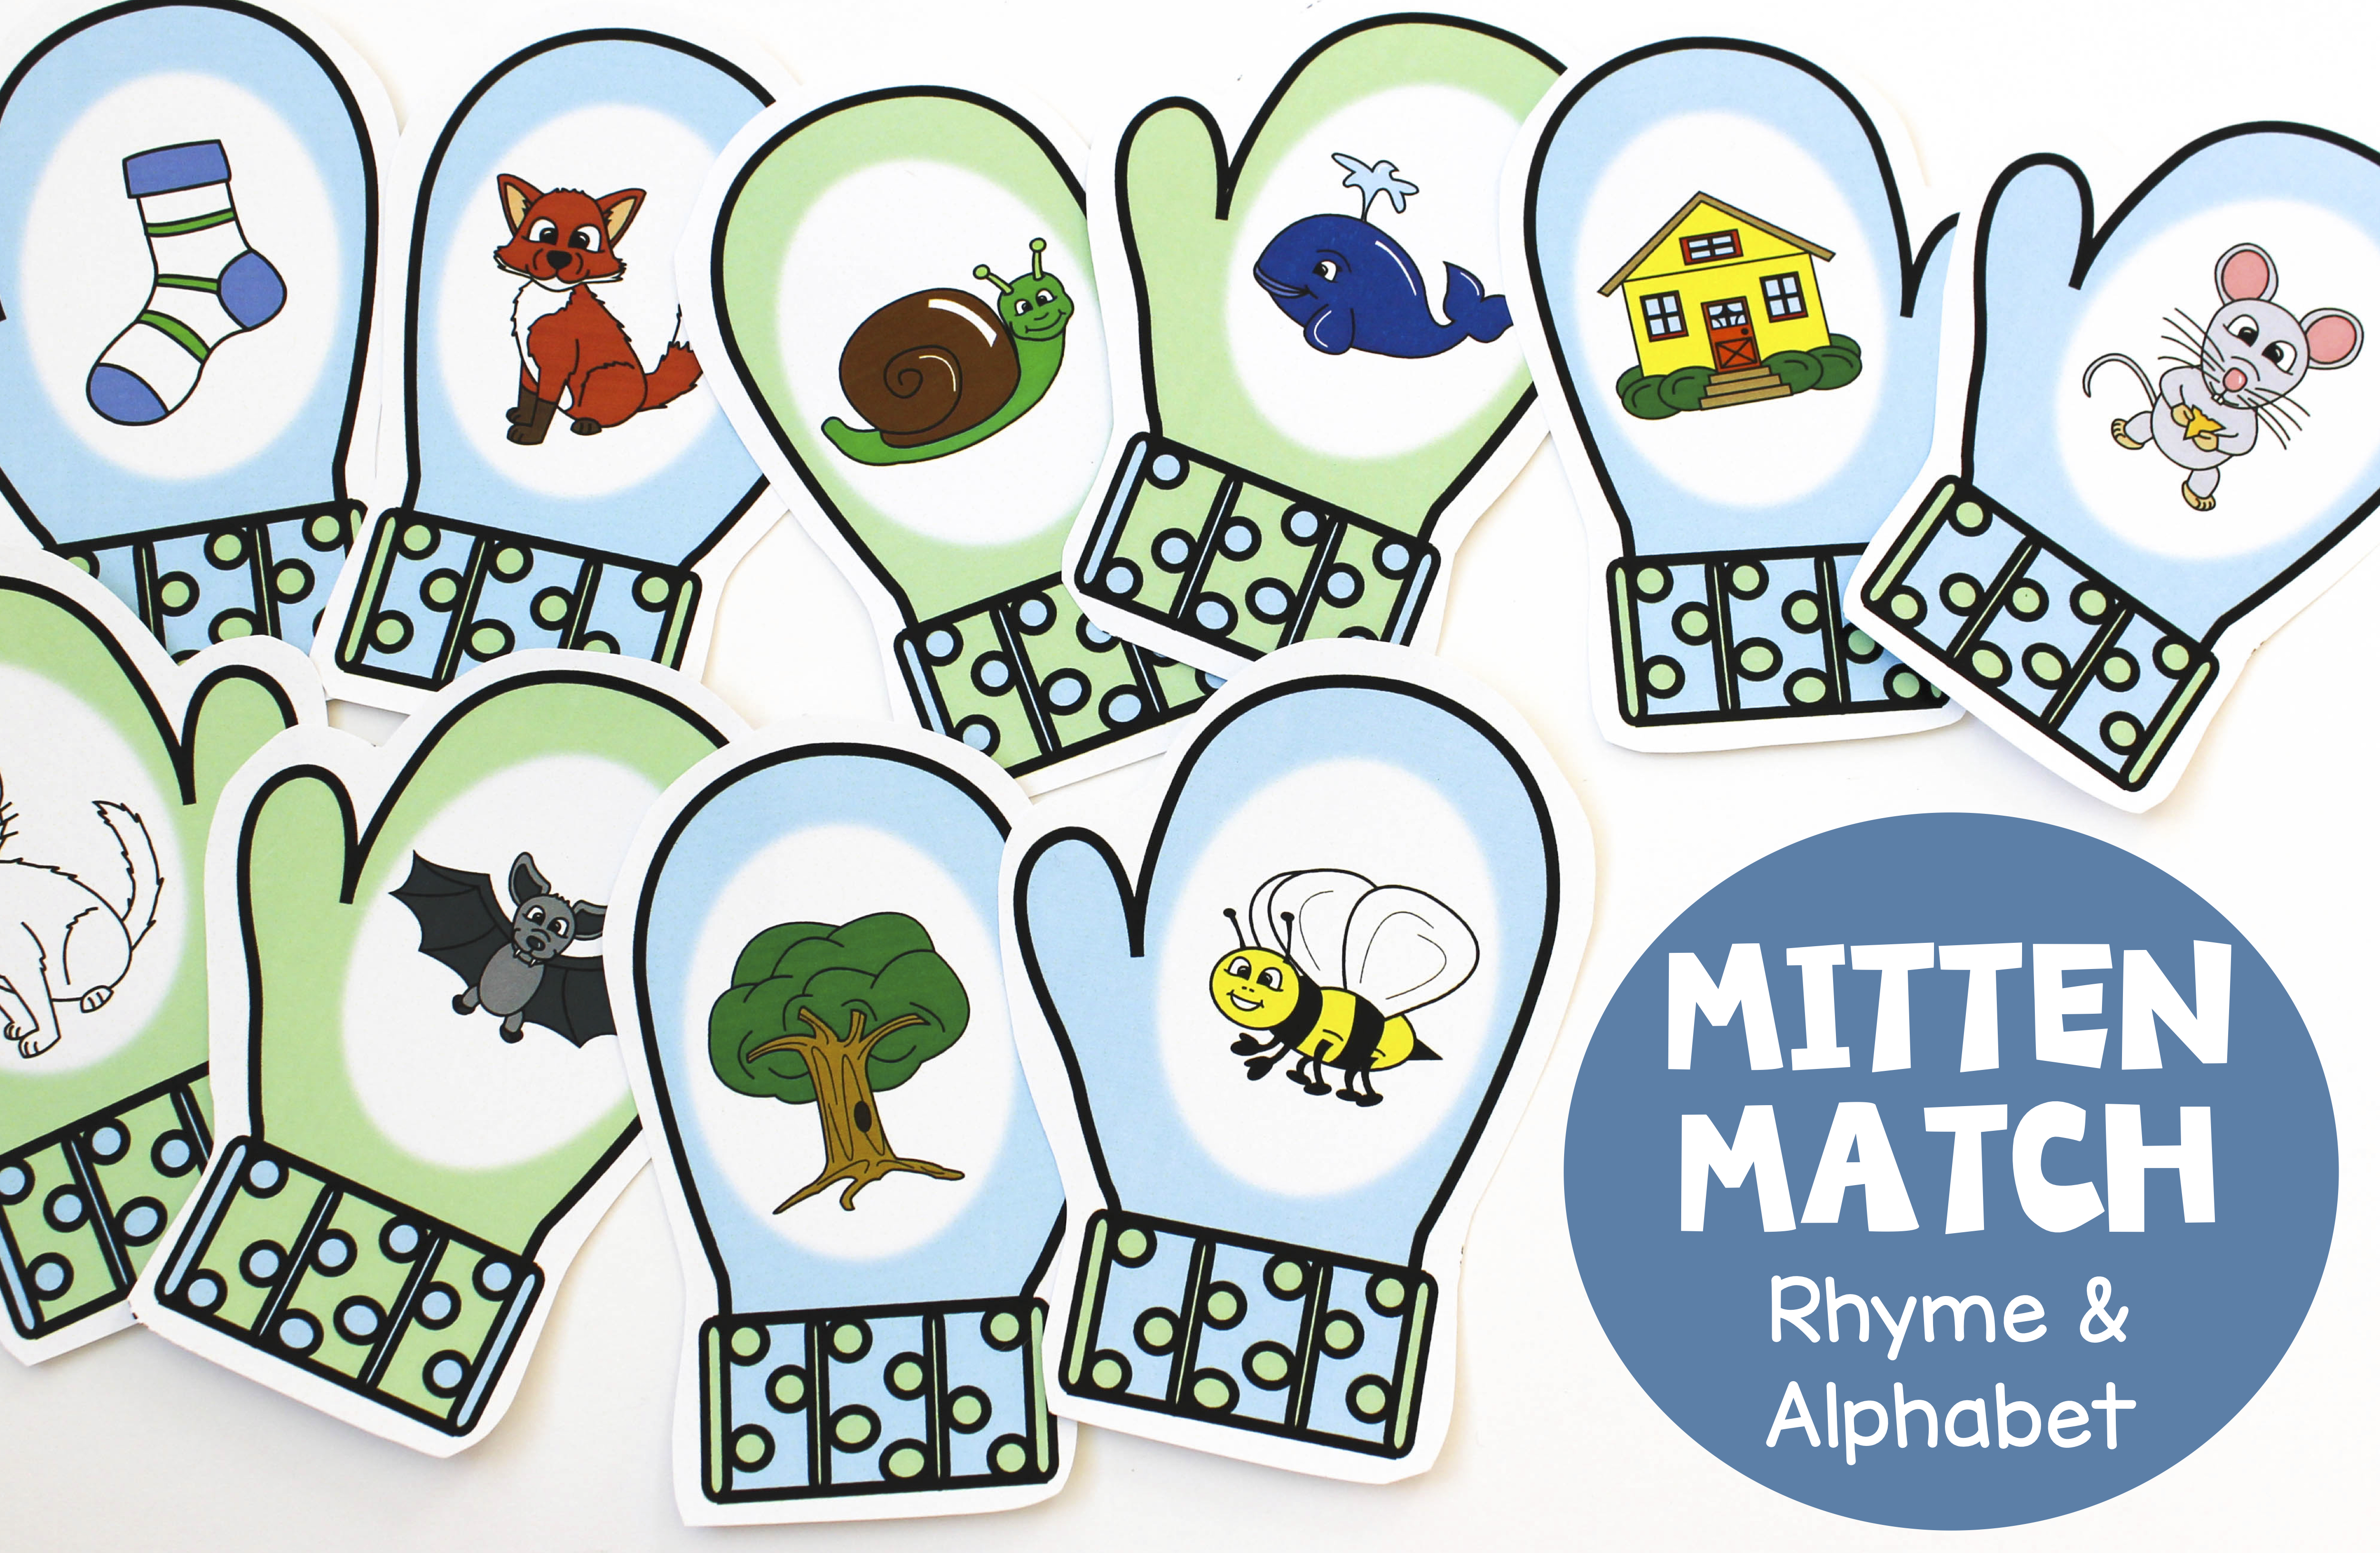 The Mitten Printables Printable Word Searches